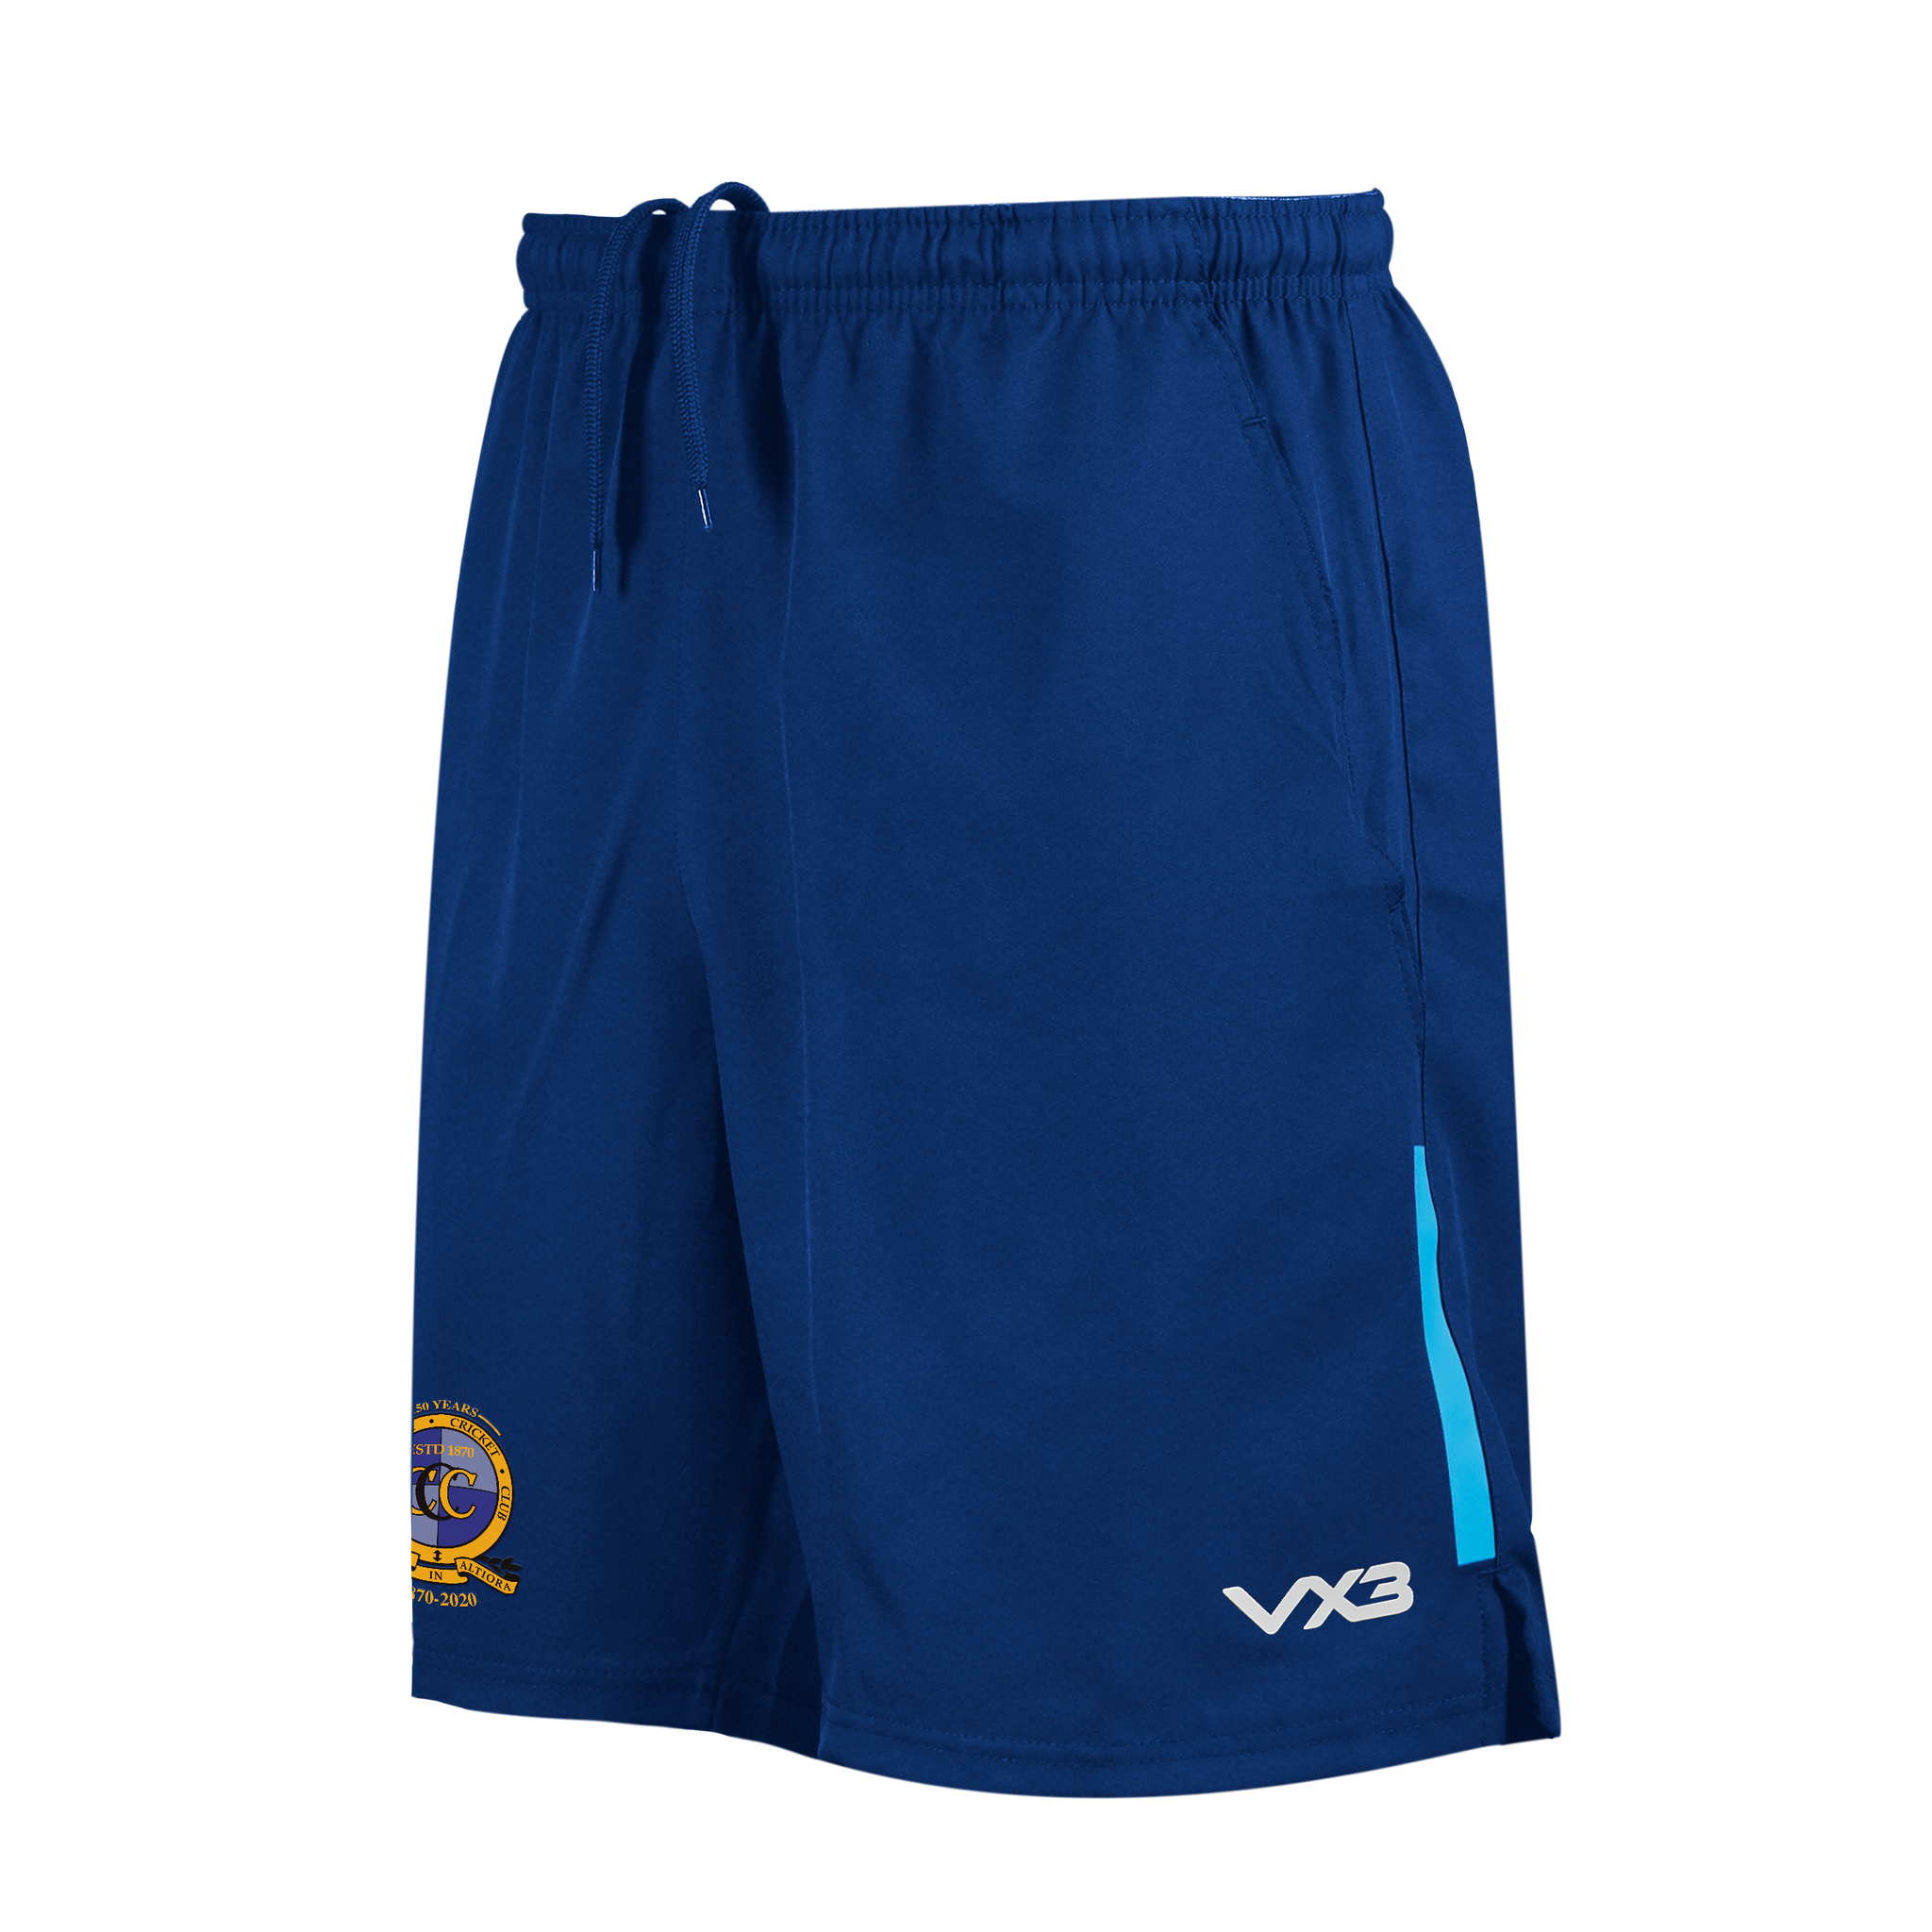 Conisbrough CC Fortis Youth Travel Shorts